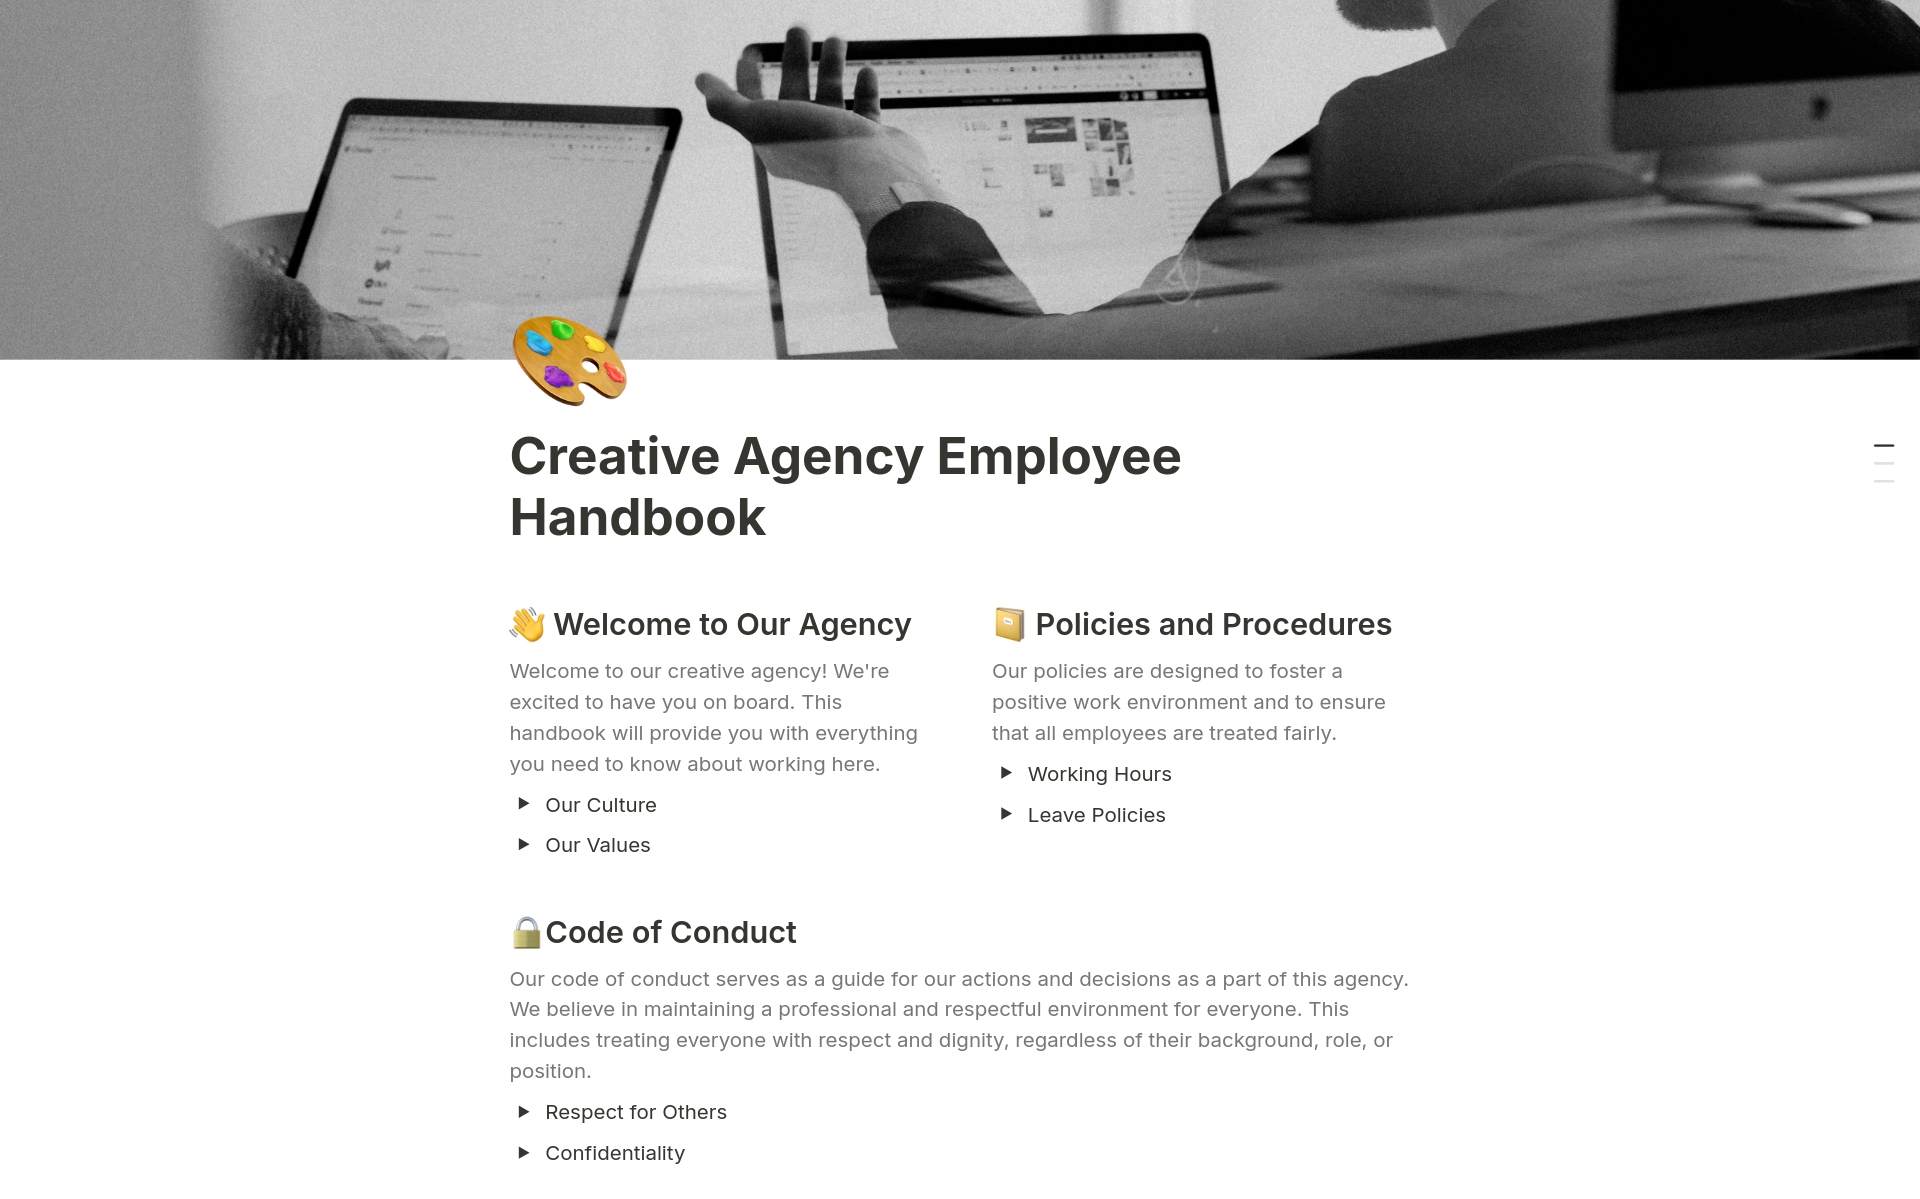 Essential handbook for creative agency employees, detailing creative processes, collaboration tools, and company culture.